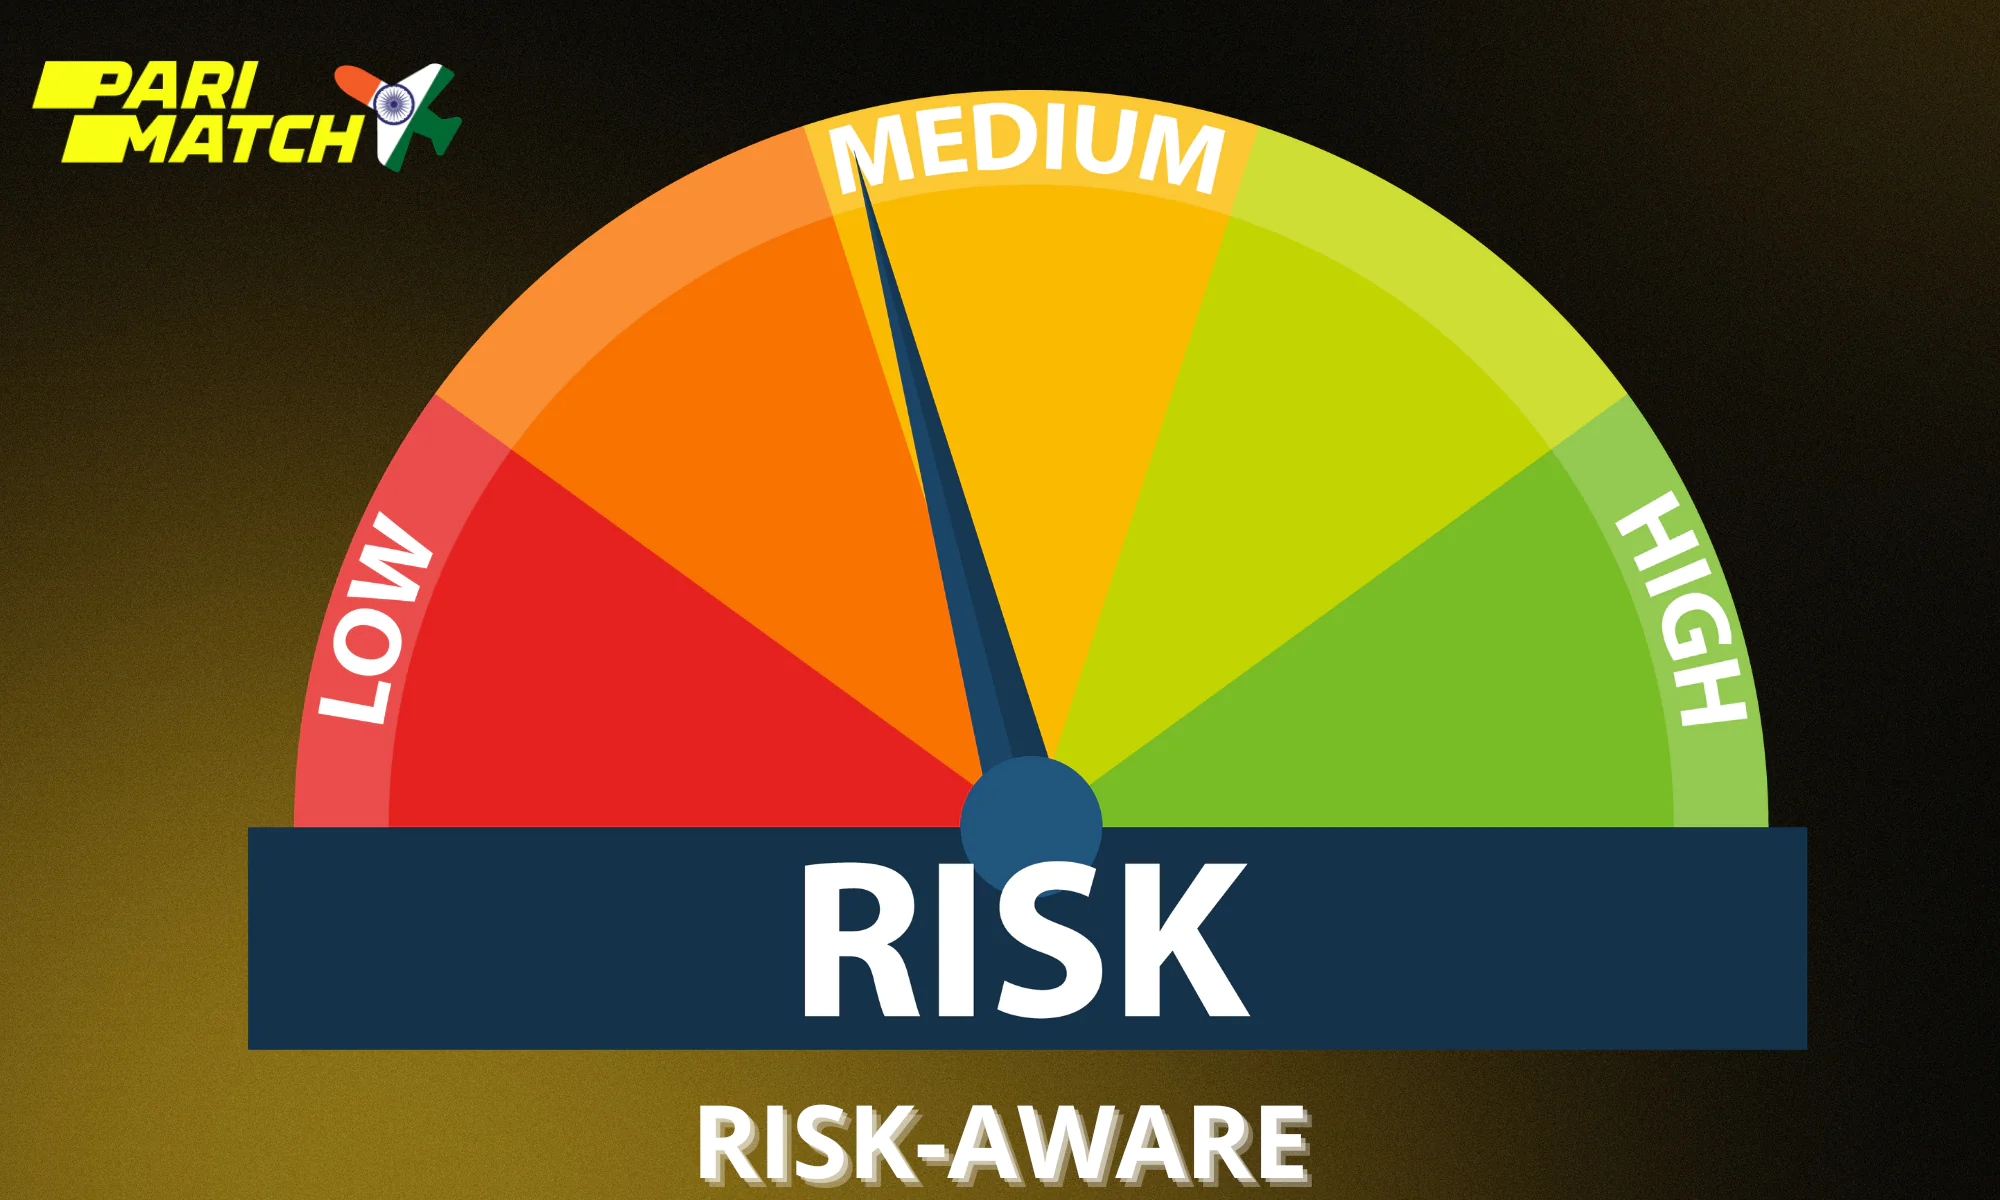 These signals indicate potential risks in the game